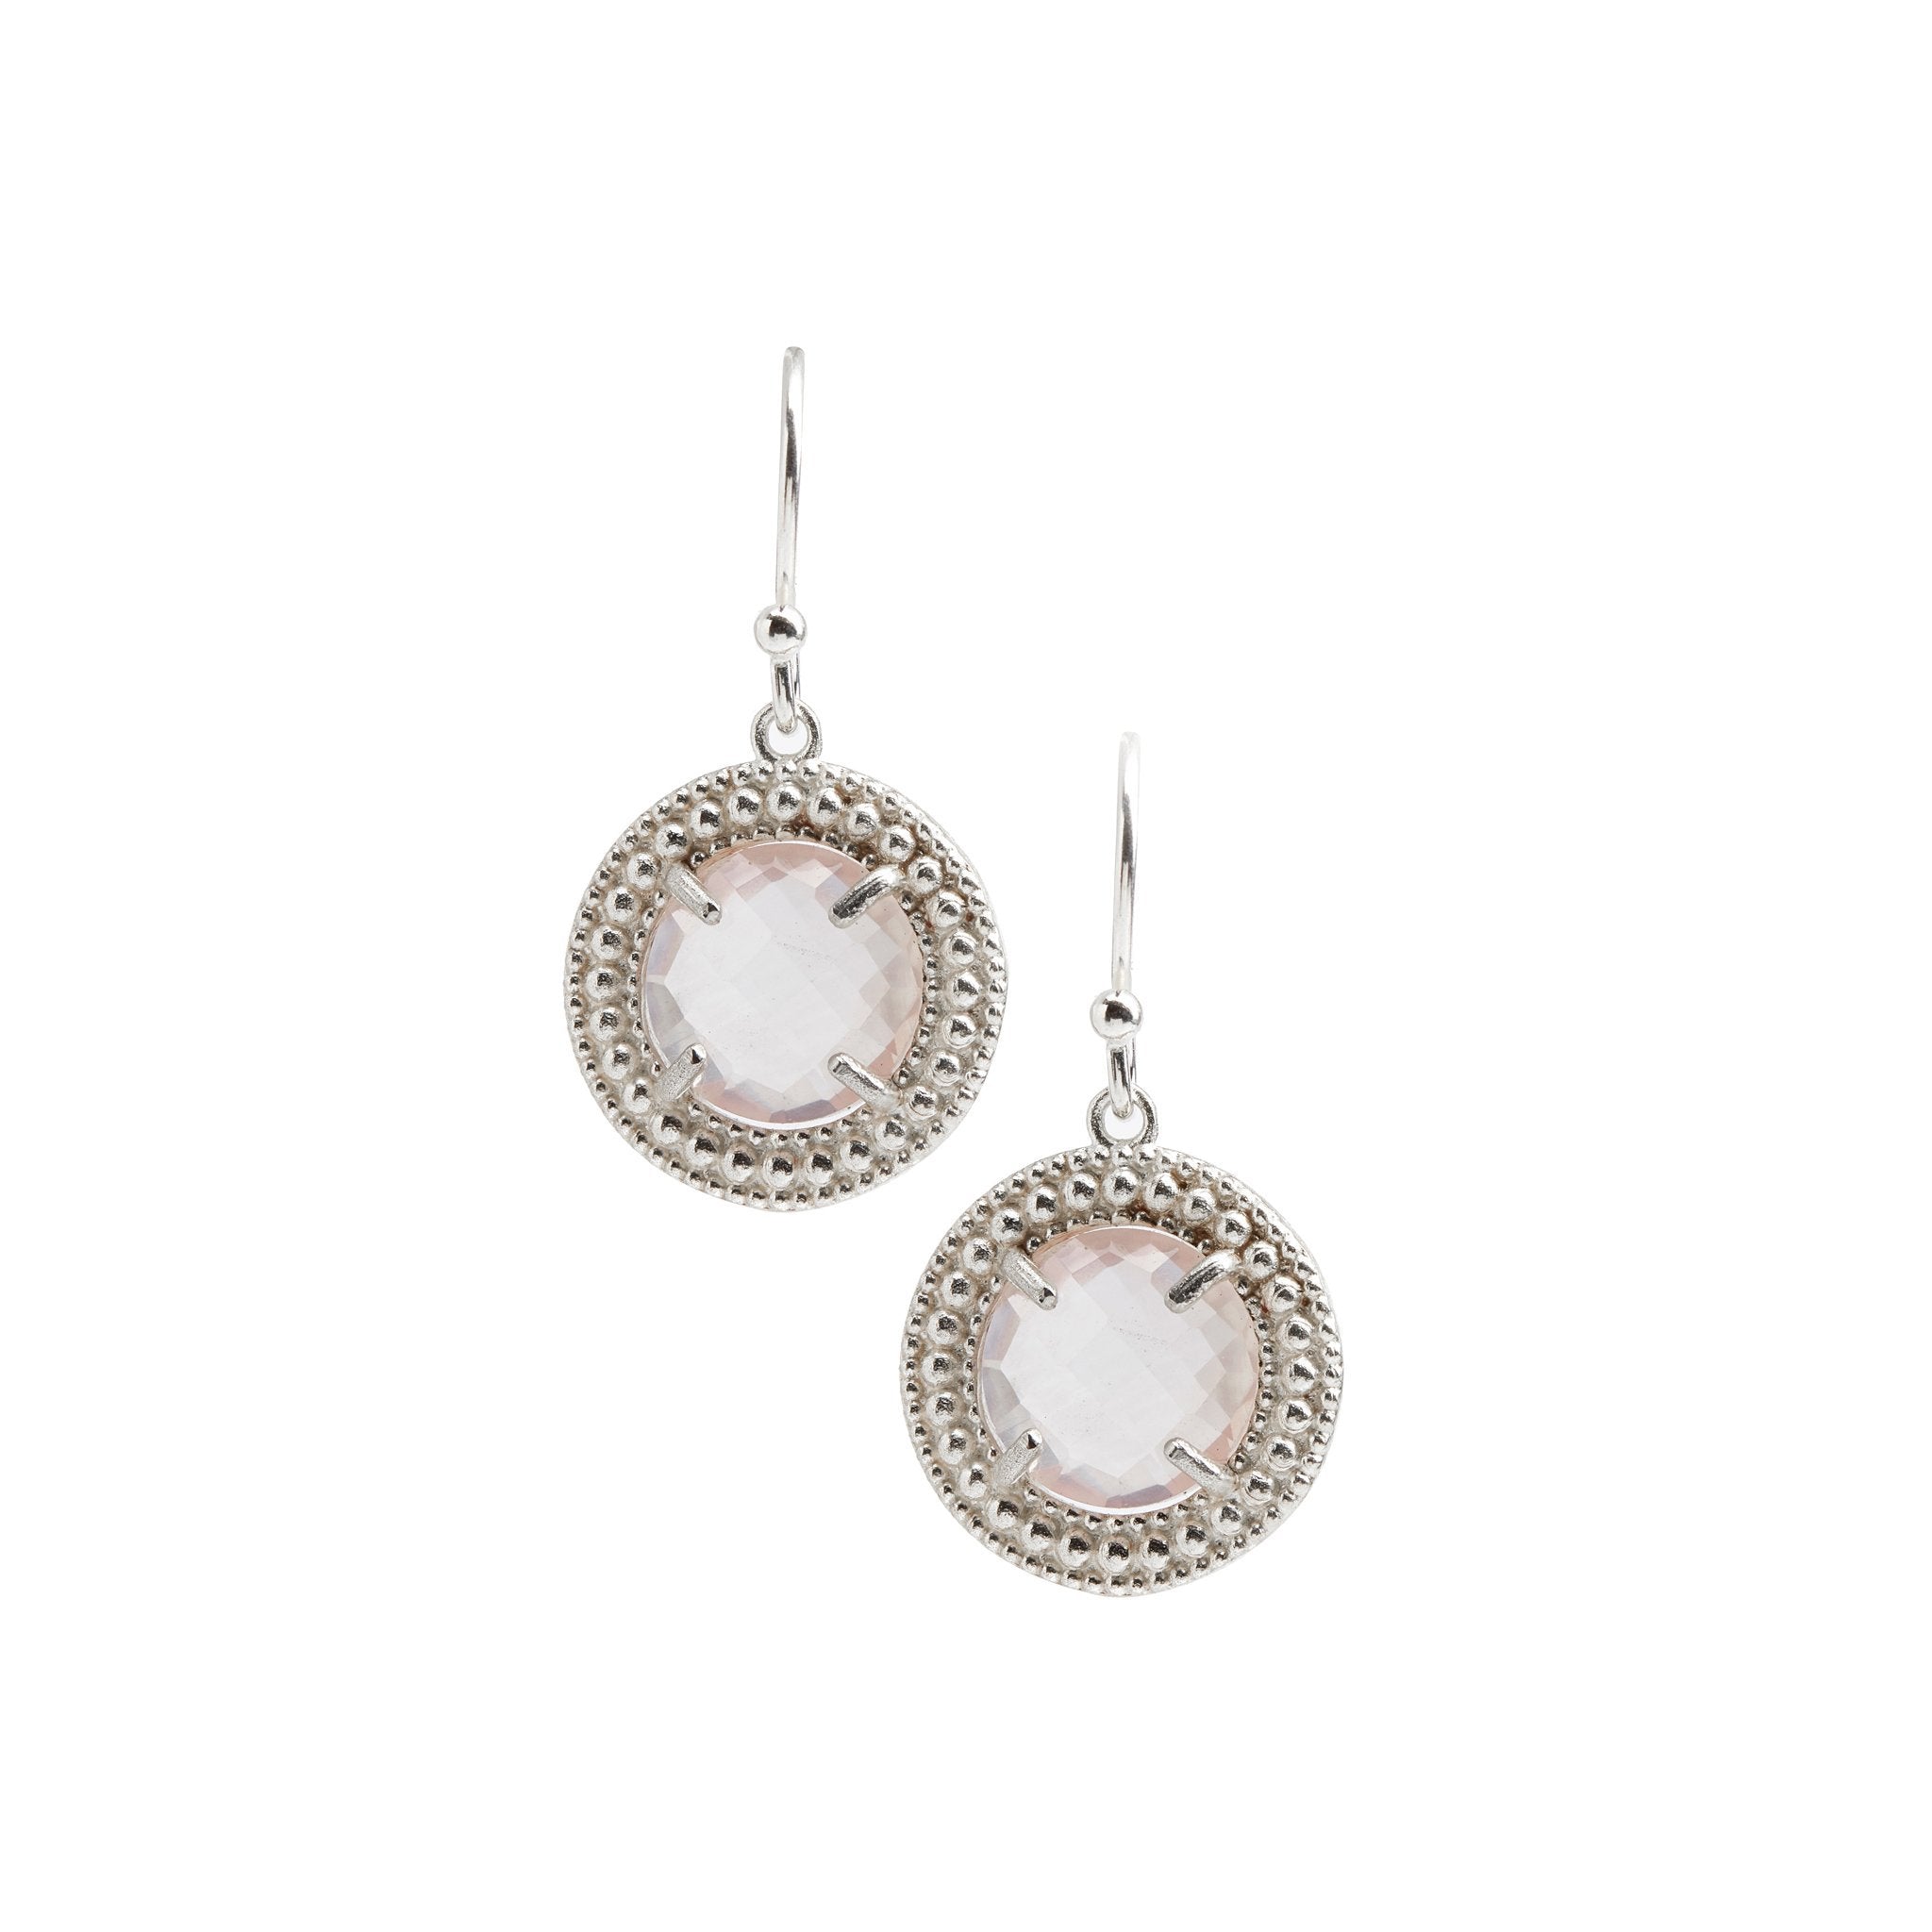 The Classic Earrings with rose quartz. - Christelle Chamberland